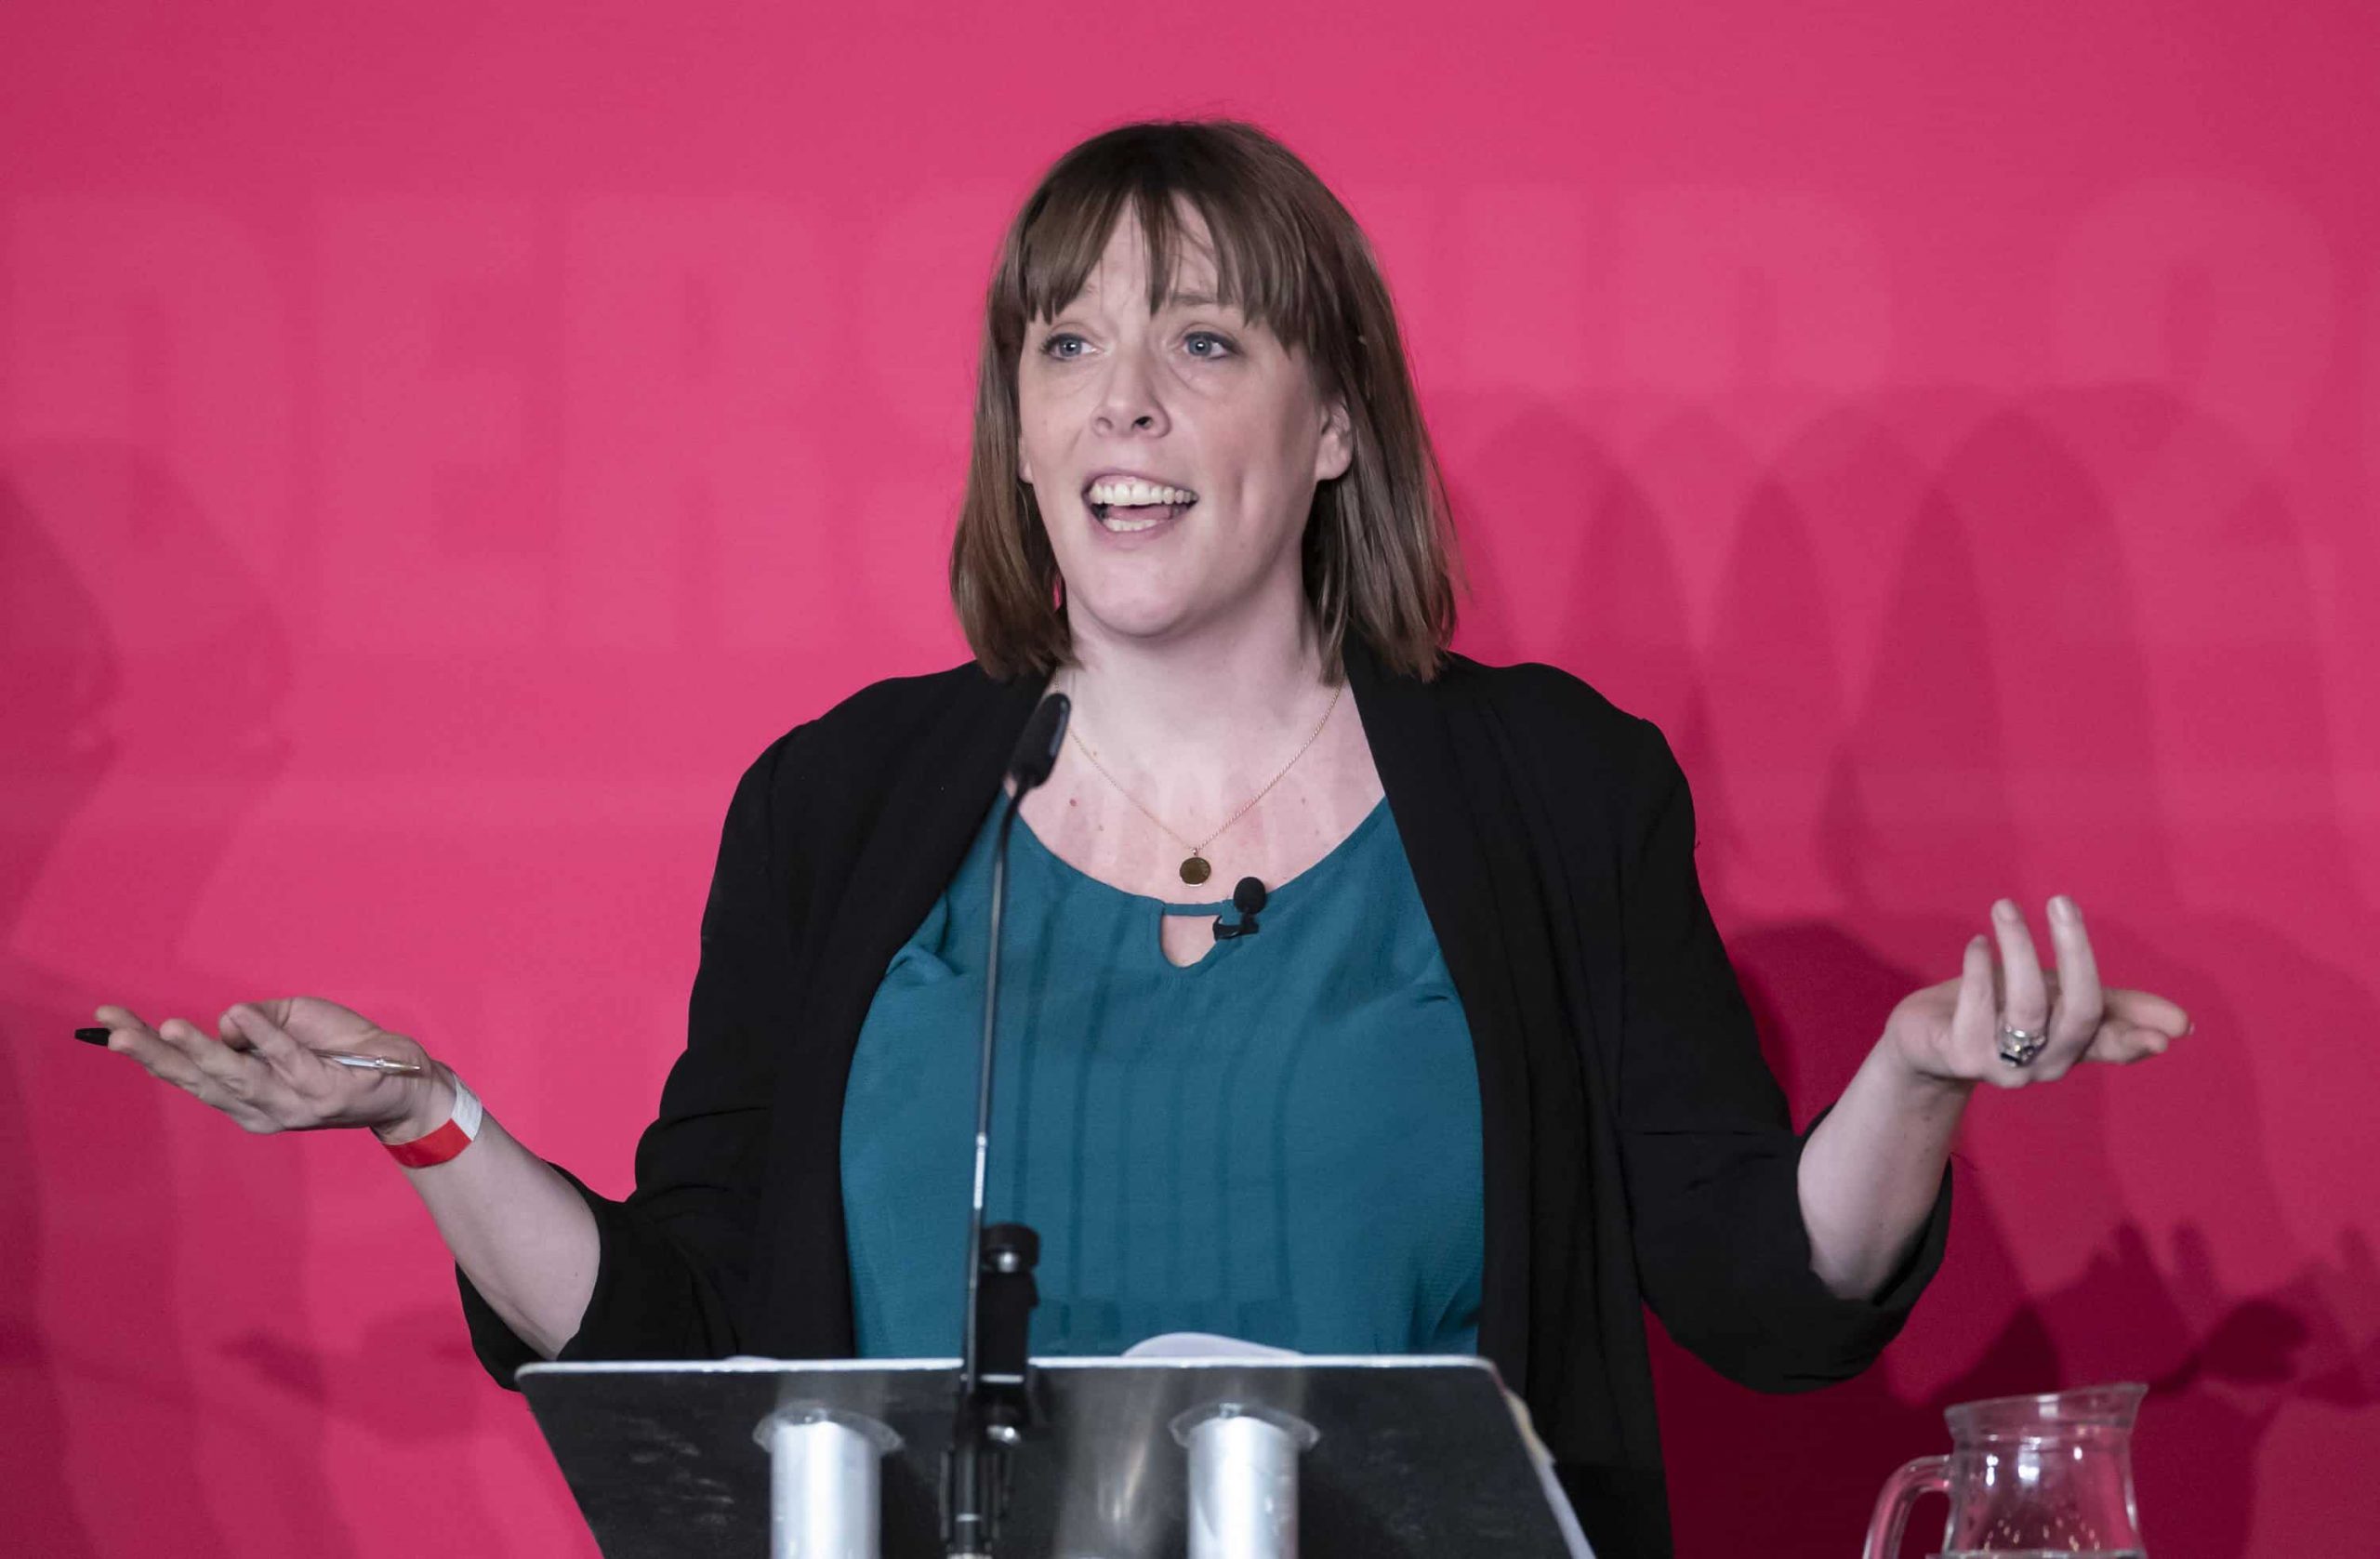 Labour leadership hopeful Jess Phillips insists she is not an ‘uber Remainer’